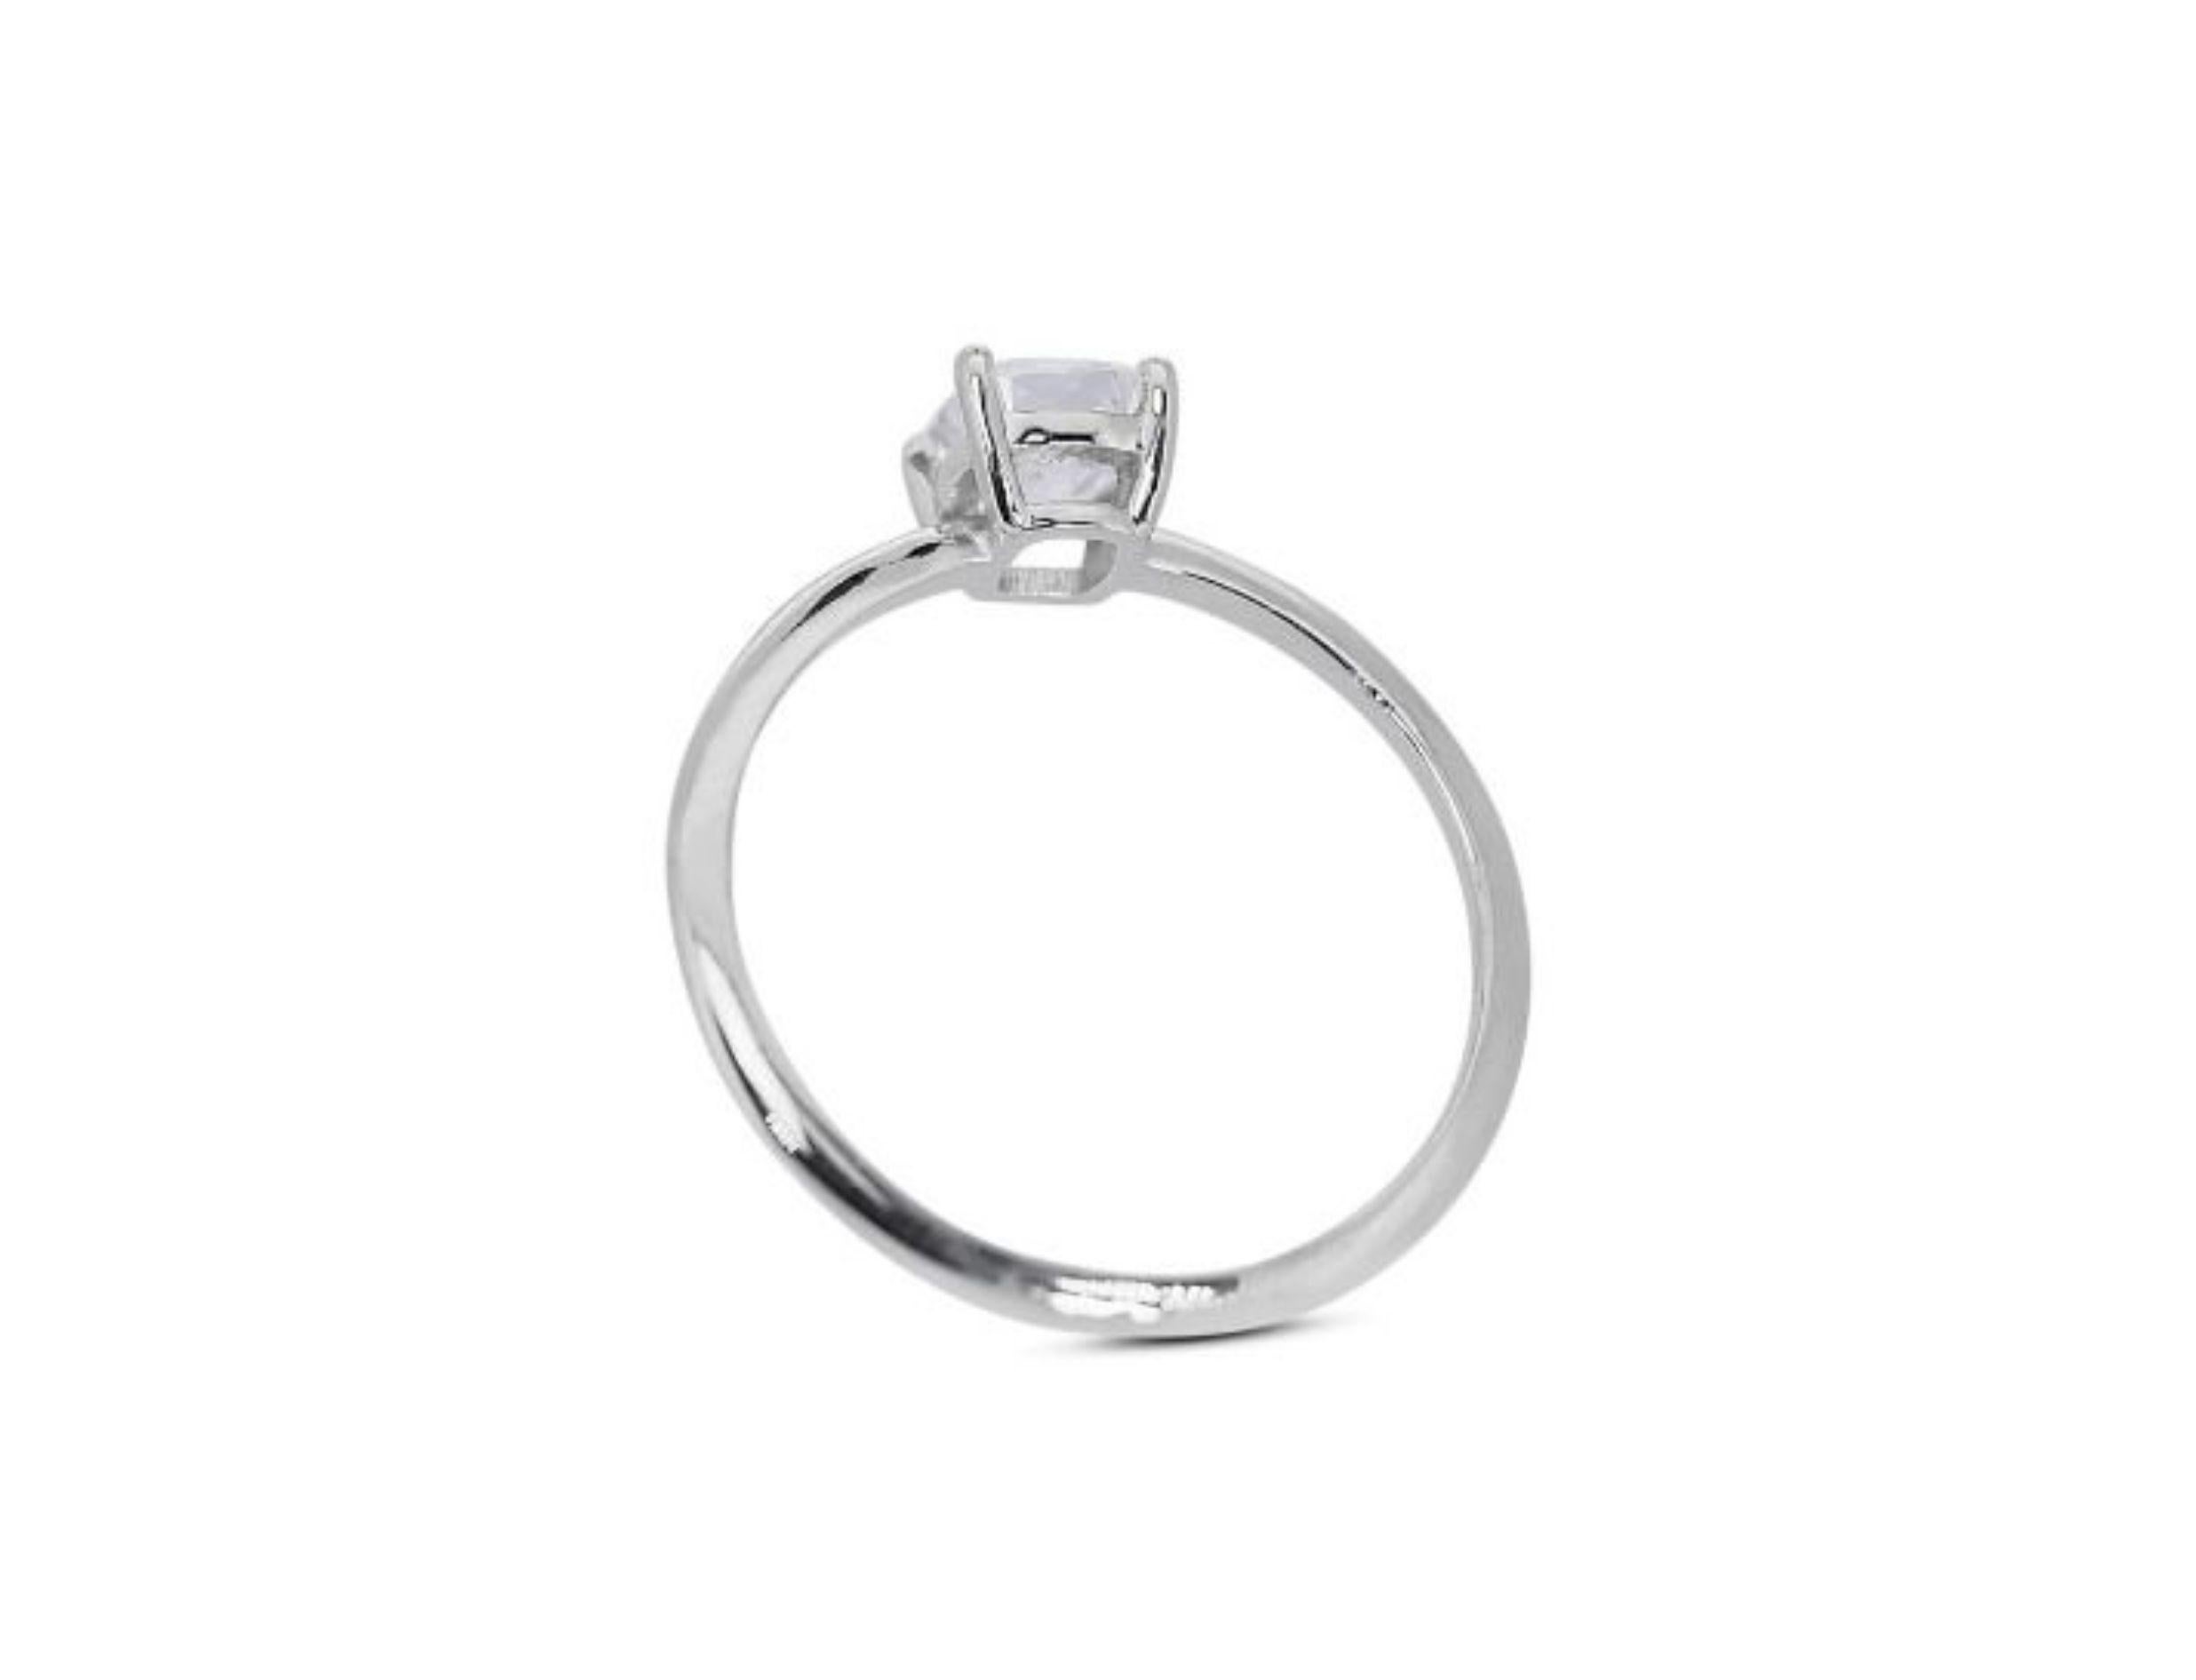 This stunning ring features a dazzling 0.7 carat E color, VS1 clarity cushion modified brilliant diamond. The diamond is set in 18K white gold with a high quality polish. The ring comes with a GIA certificate and a nice jewelry box.

The cushion